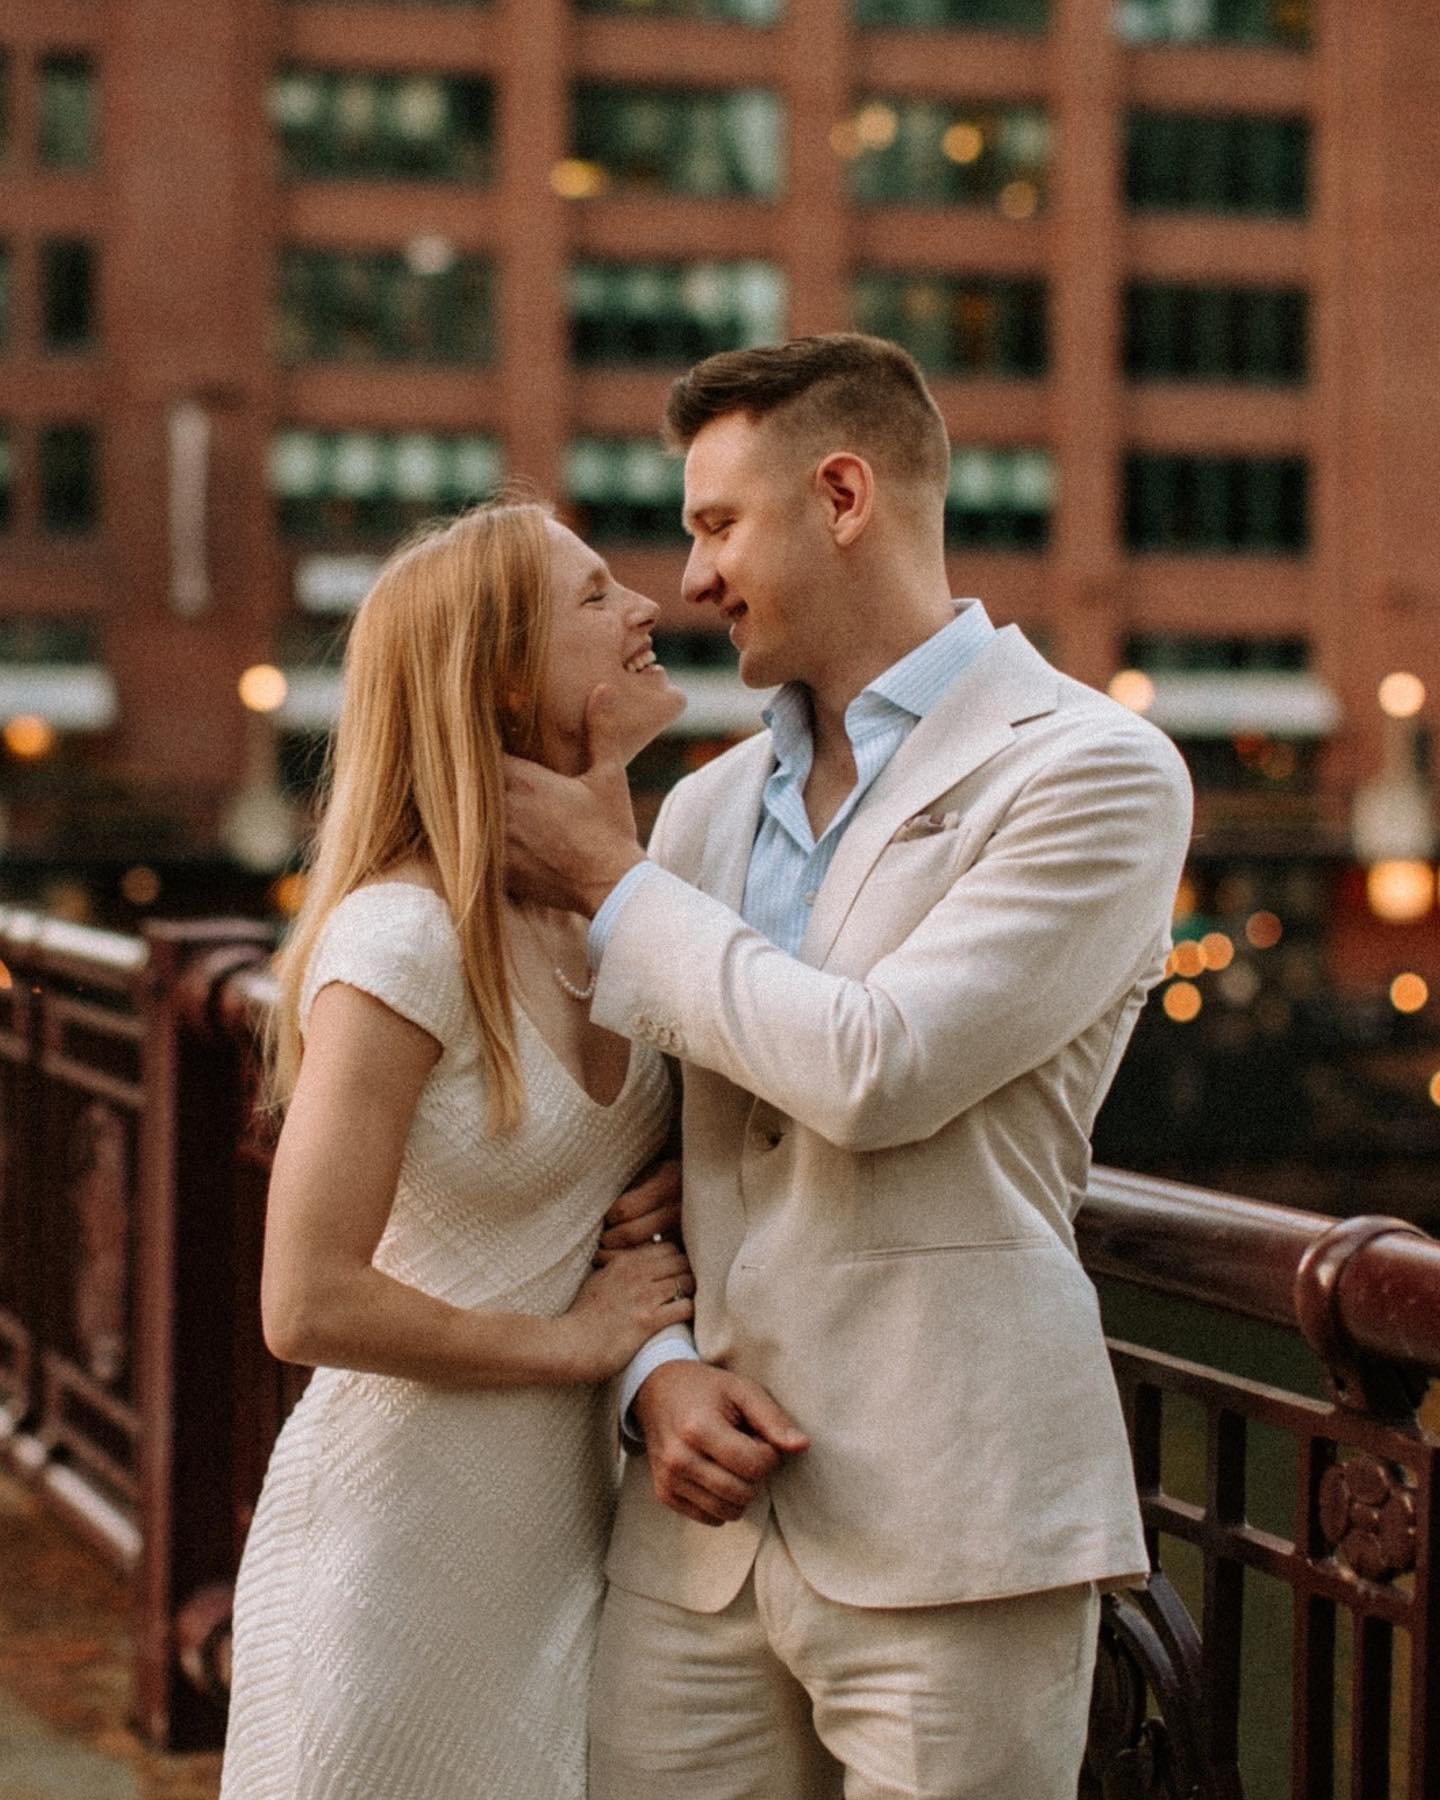 It&rsquo;s officially spring shoot season and I&rsquo;m giddy about it 🌸

Made it down to Chicago for this wonderful engagement shoot! We hopped around the city and had so much fun finding places to shoot together! 

I LOVE my couples! Can&rsquo;t w